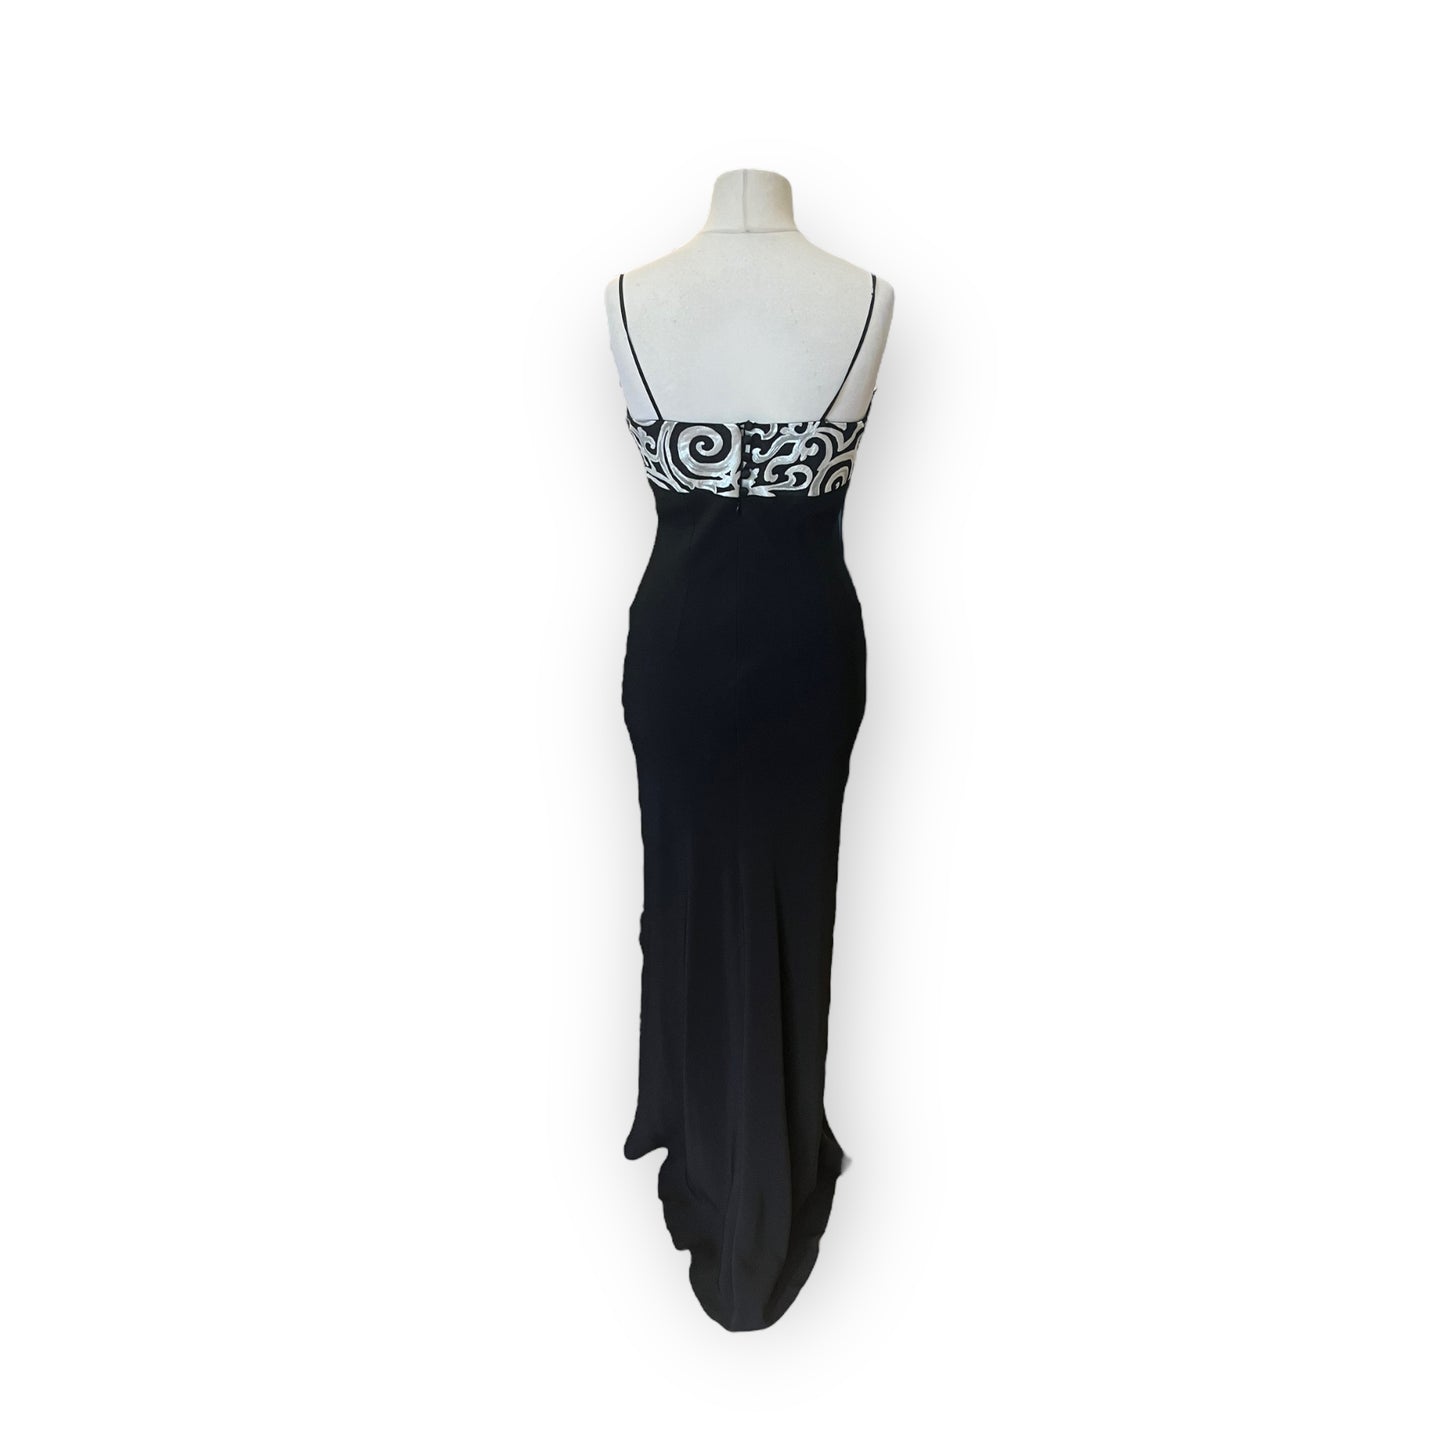 Consortium Black and Silver Formal Dress